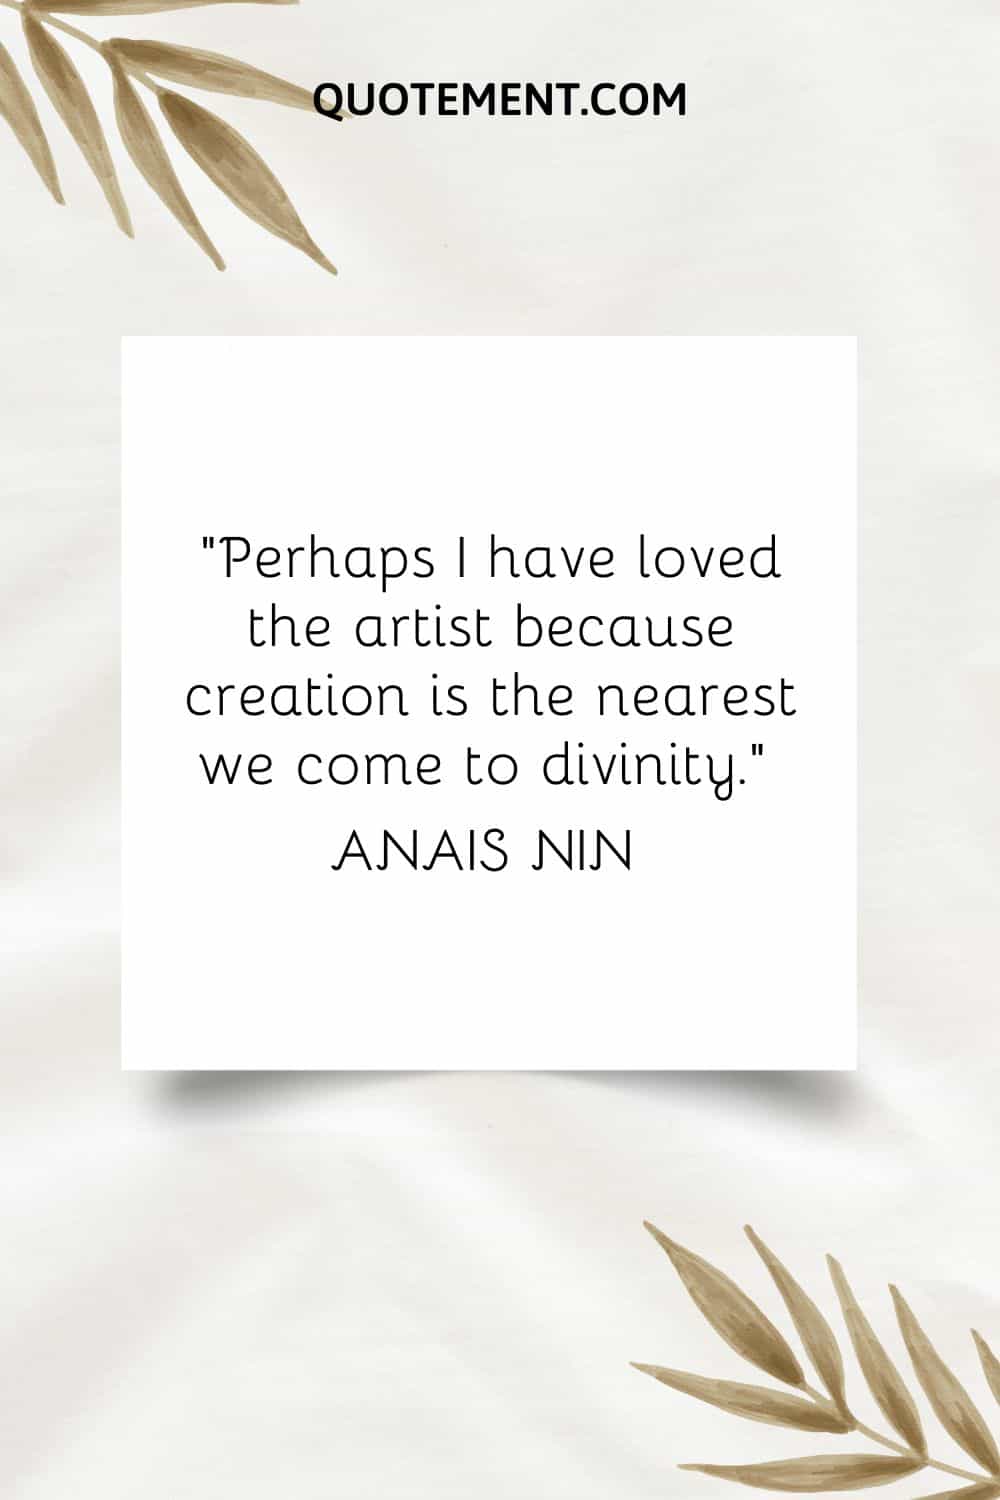 “Perhaps I have loved the artist because creation is the nearest we come to divinity.” — Anais Nin